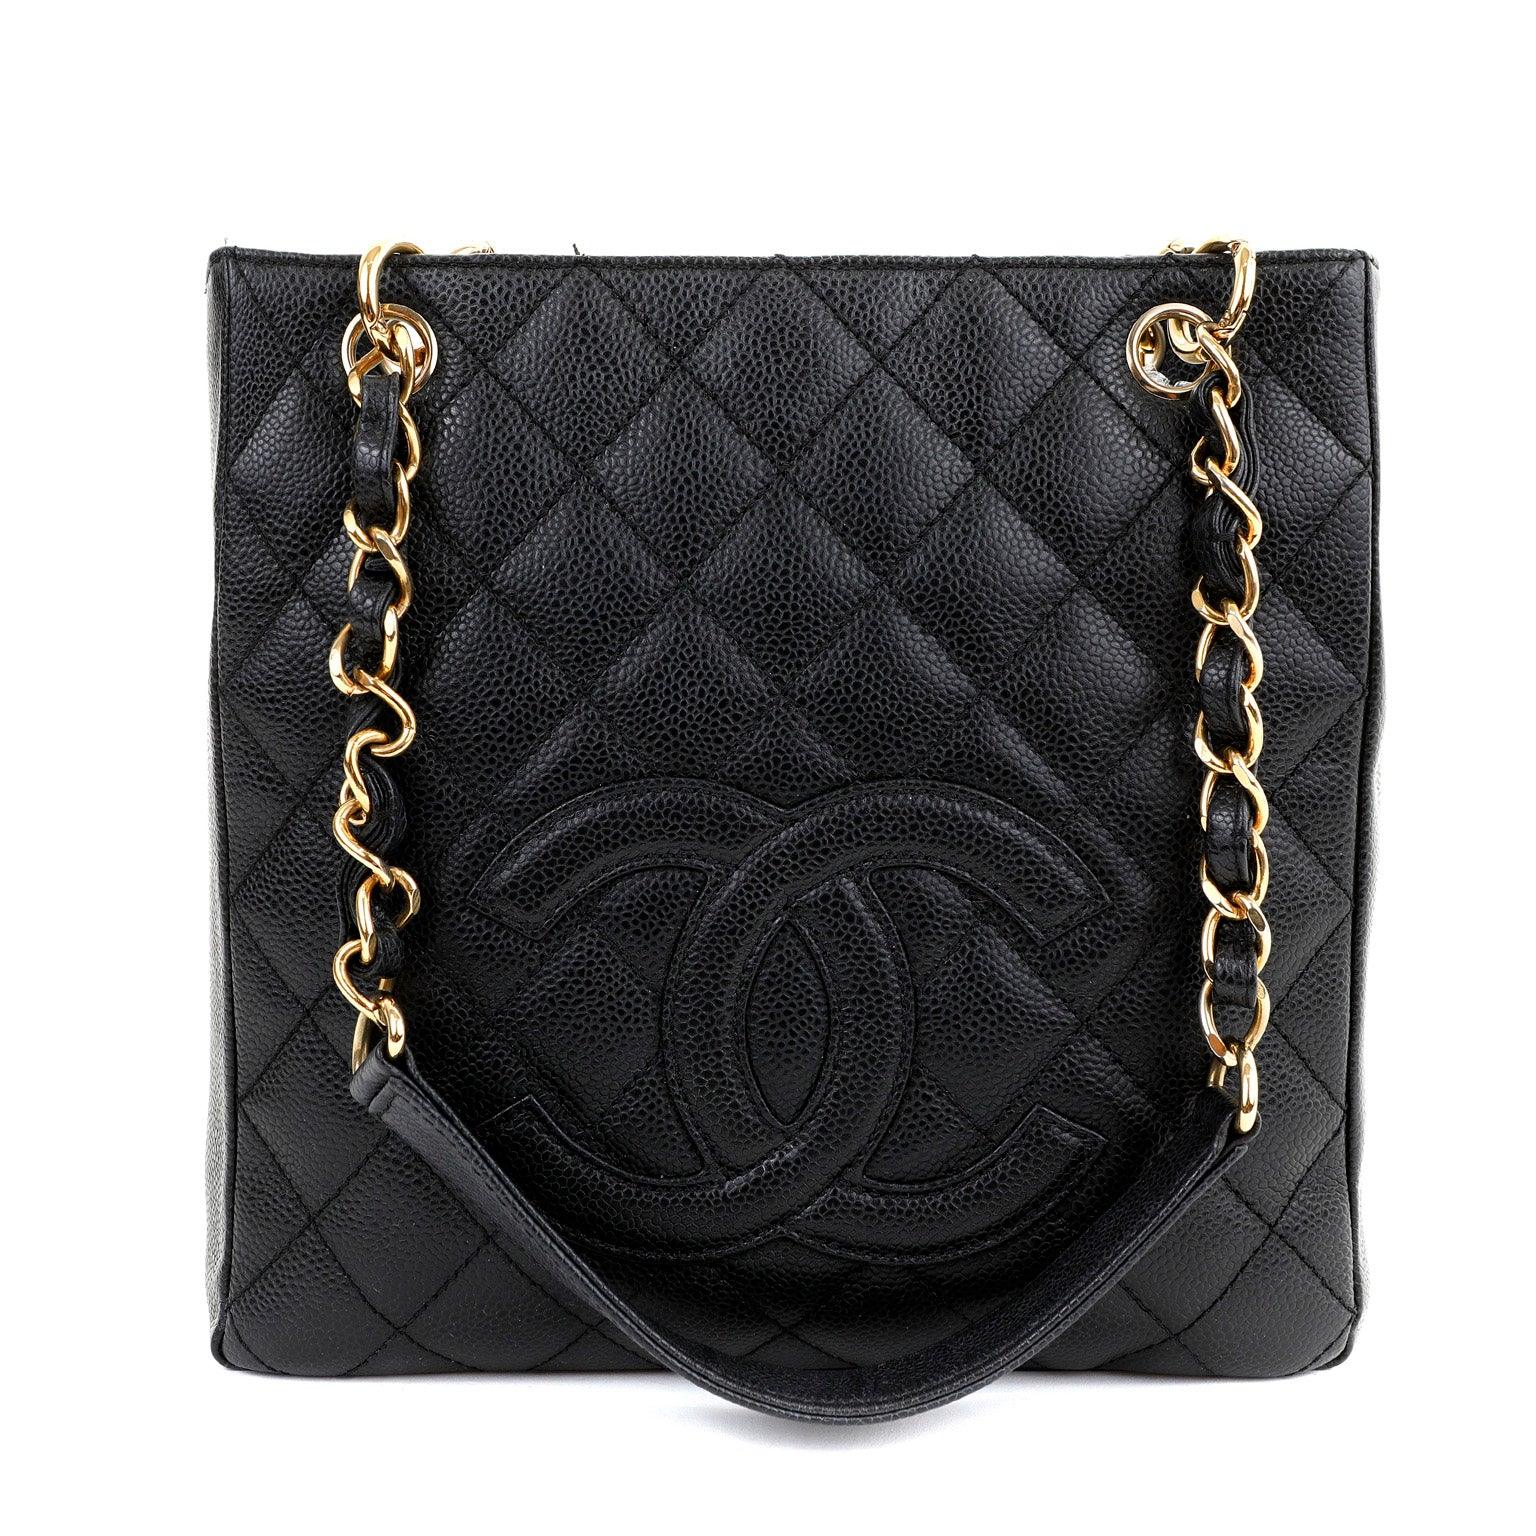 Chanel Black Caviar Petite Shopper Tote with Gold Hardware – Only